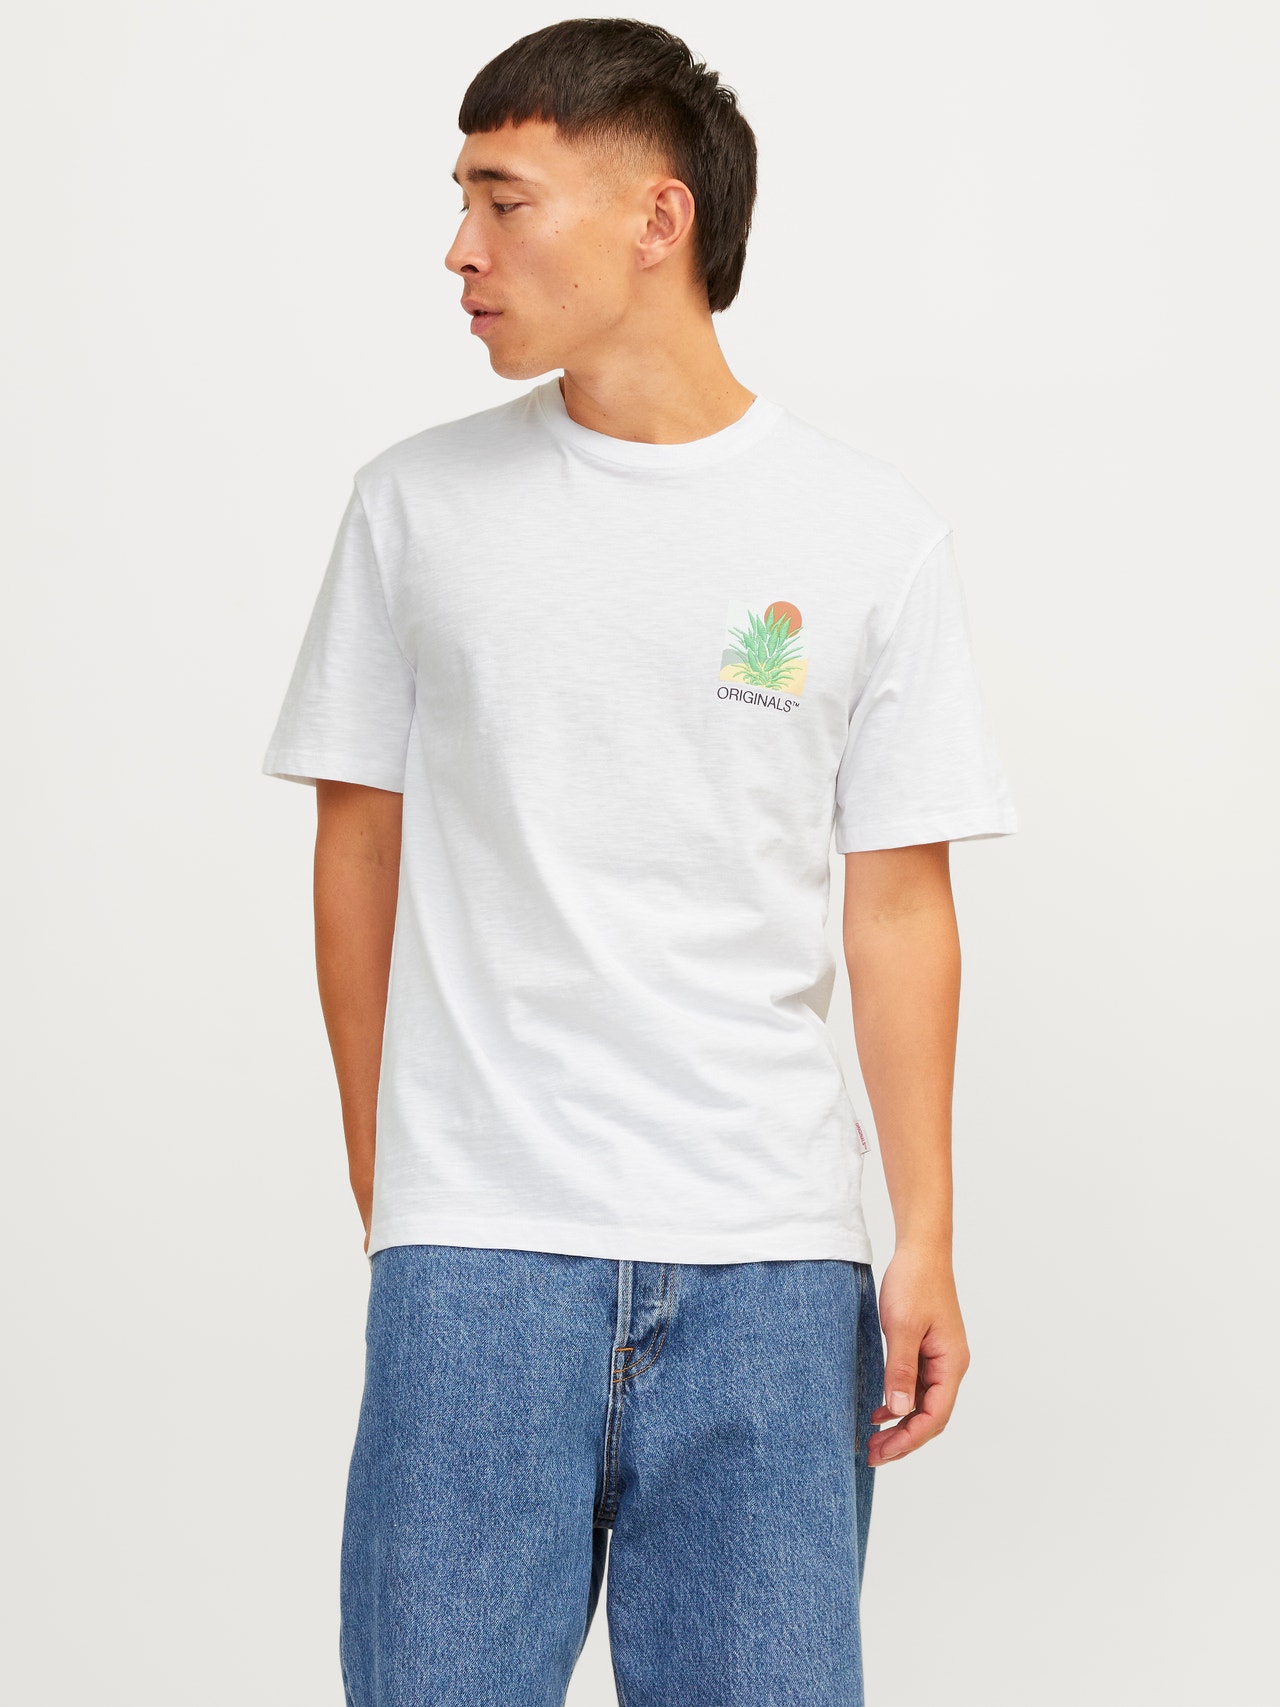 Jack & Jones Relaxed Fit Crew neck T-Shirt -Bright White - 12256215